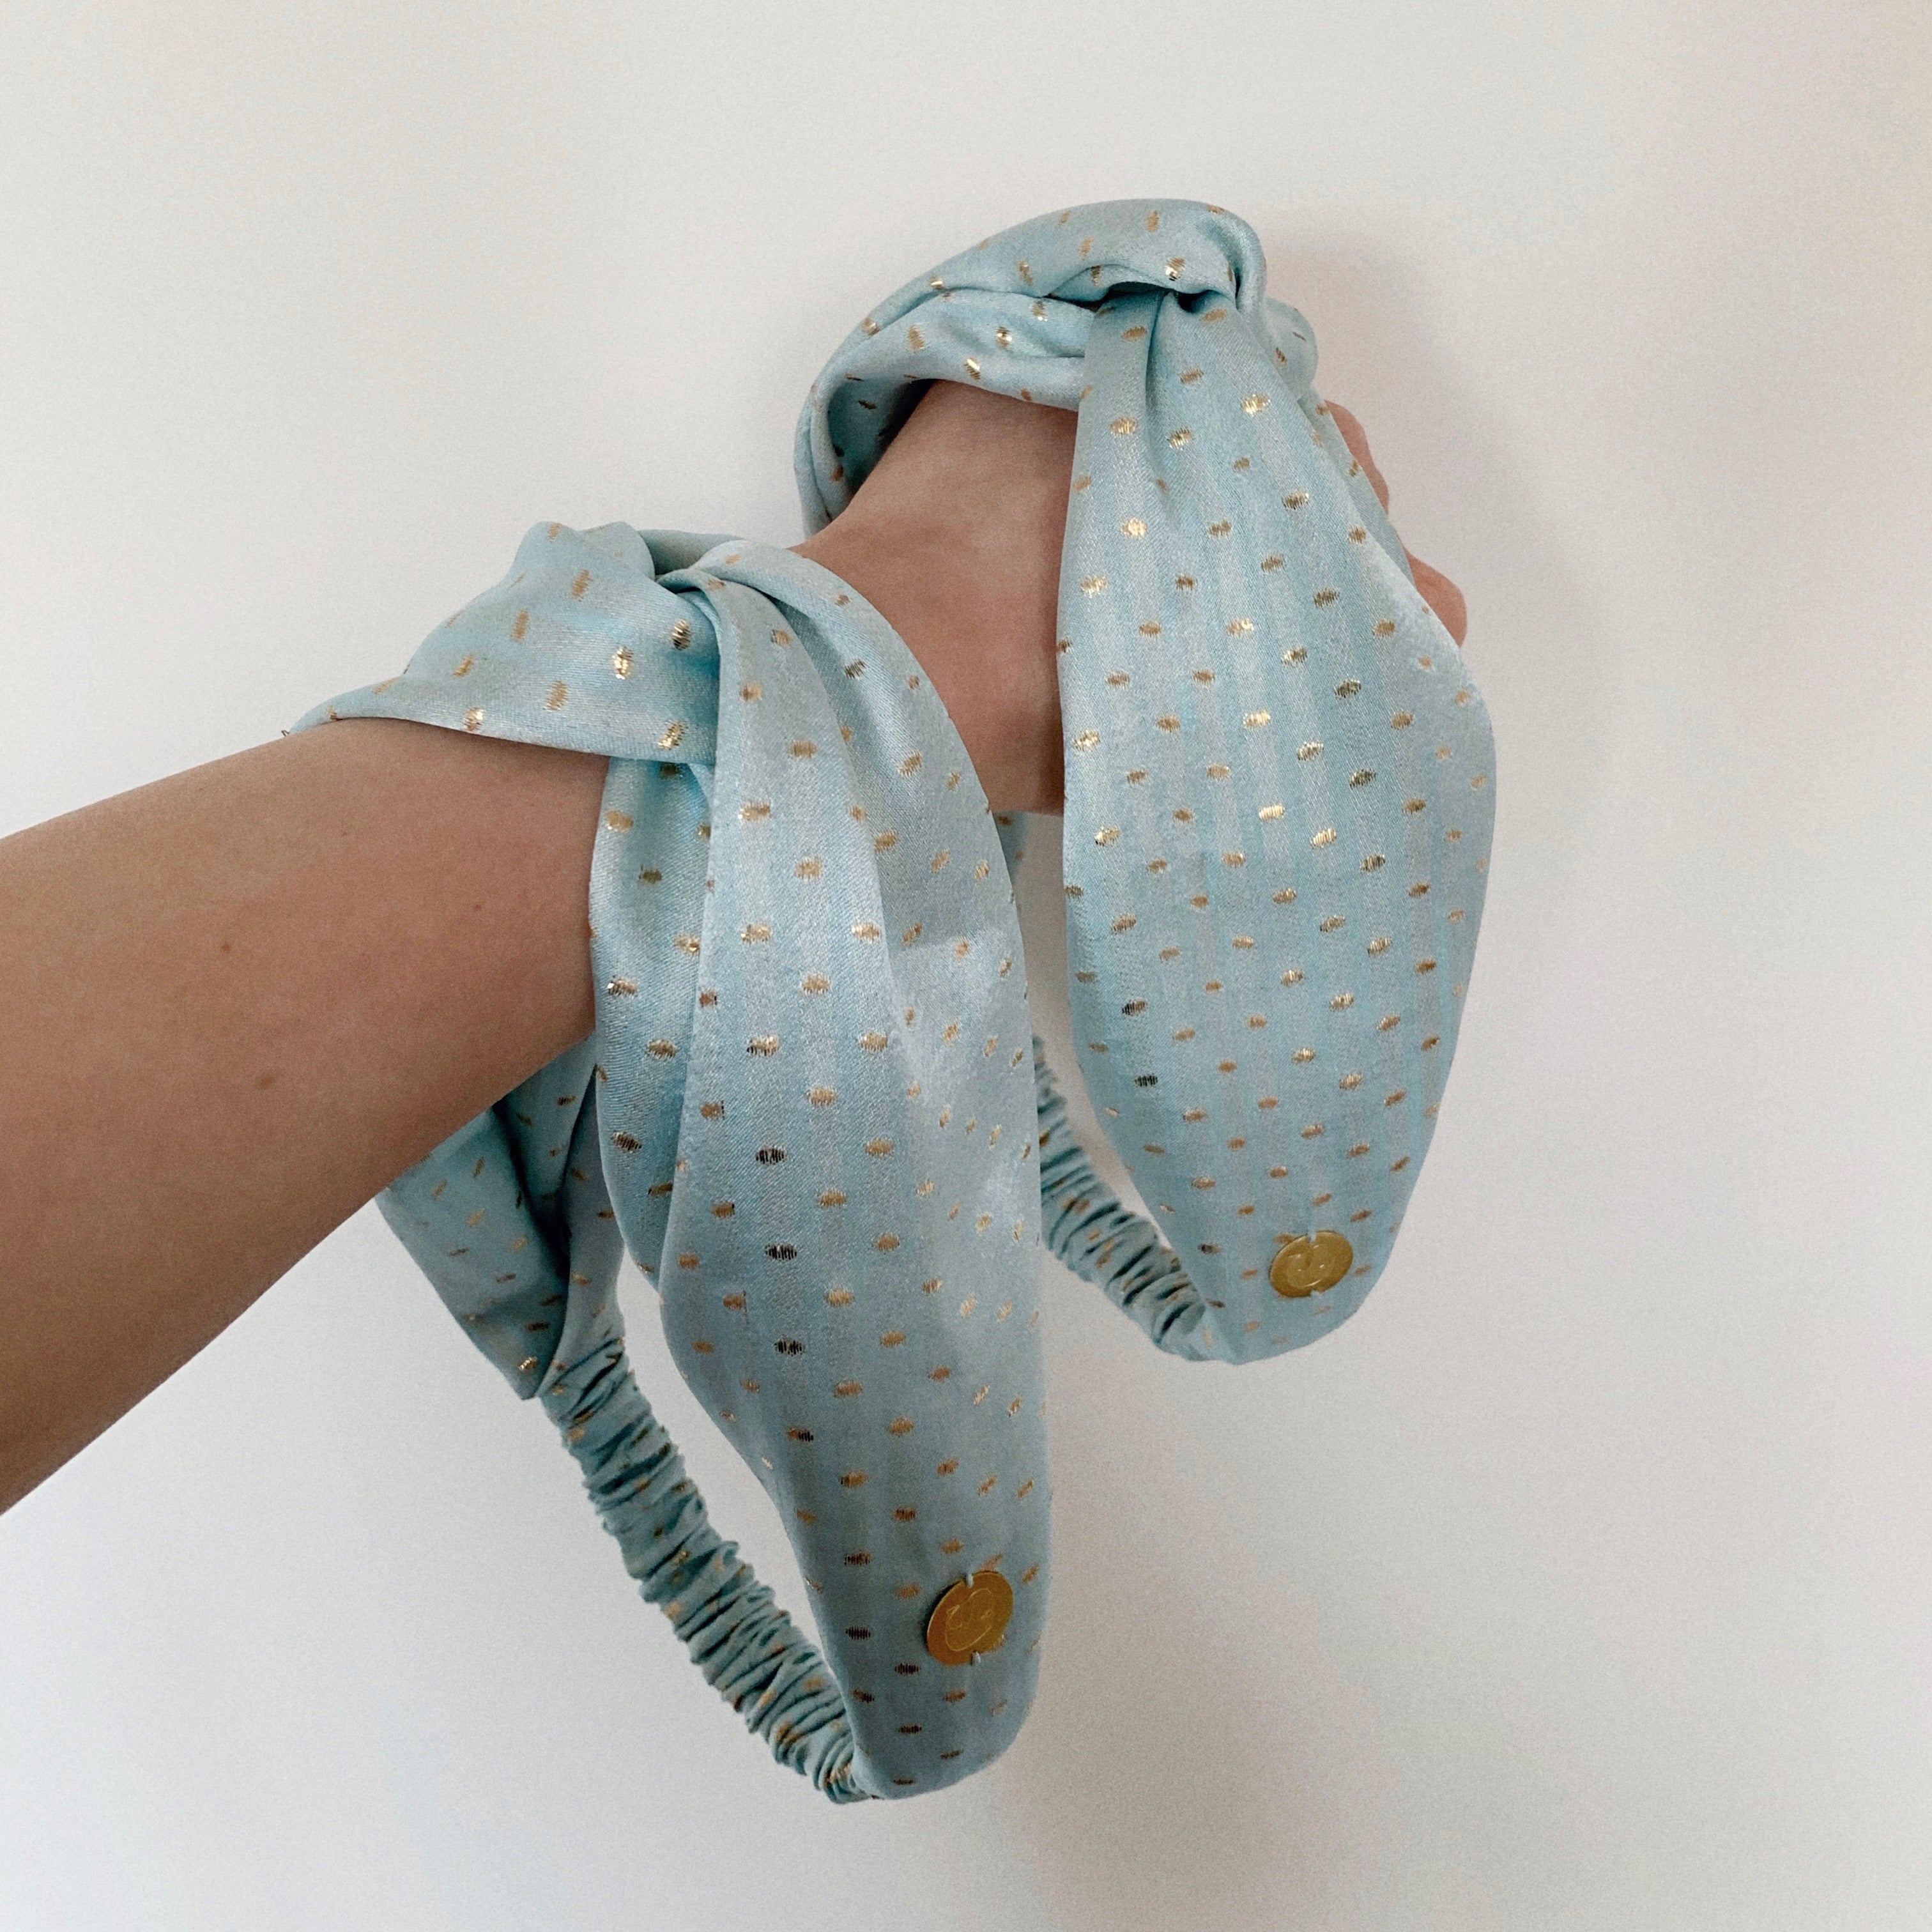 Baby Blue - 2 twisted headbands in a light blue silk stain with gold lurex spots.